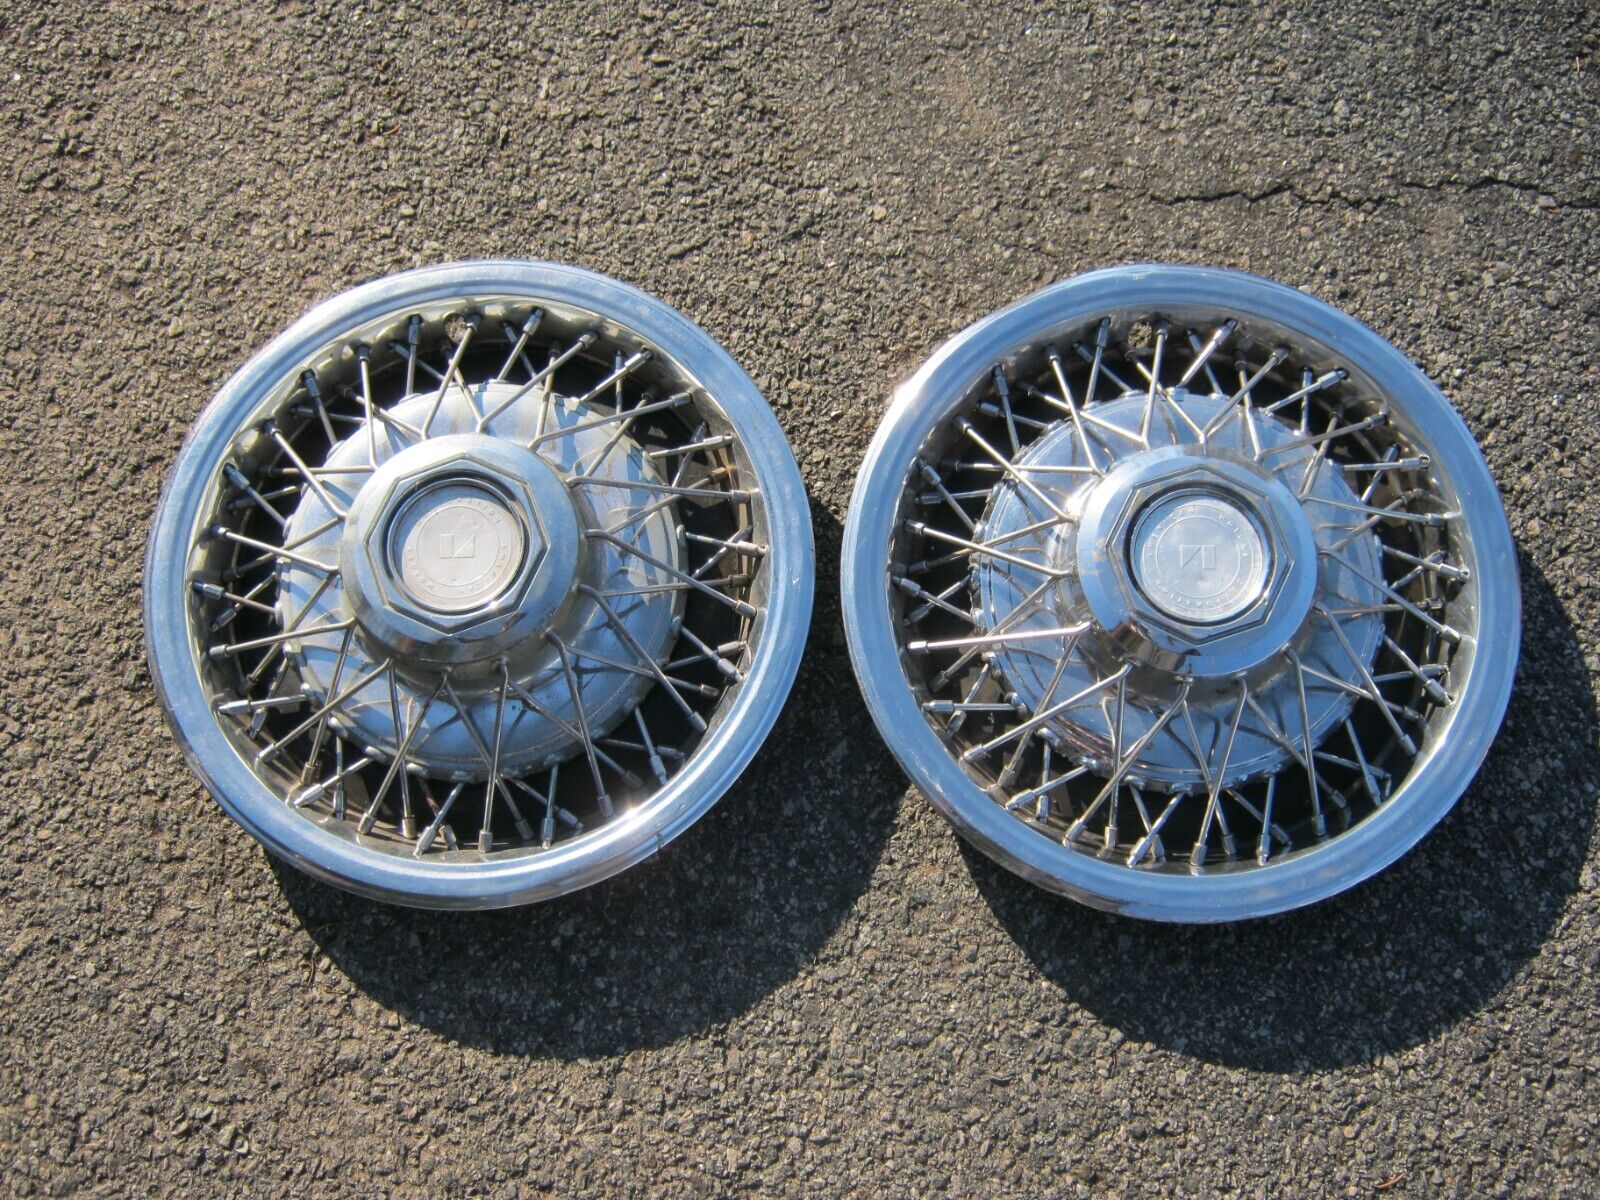 Genuine 1981 to 1983 AMC Concord 14 inch wire spoke hubcaps wheel covers